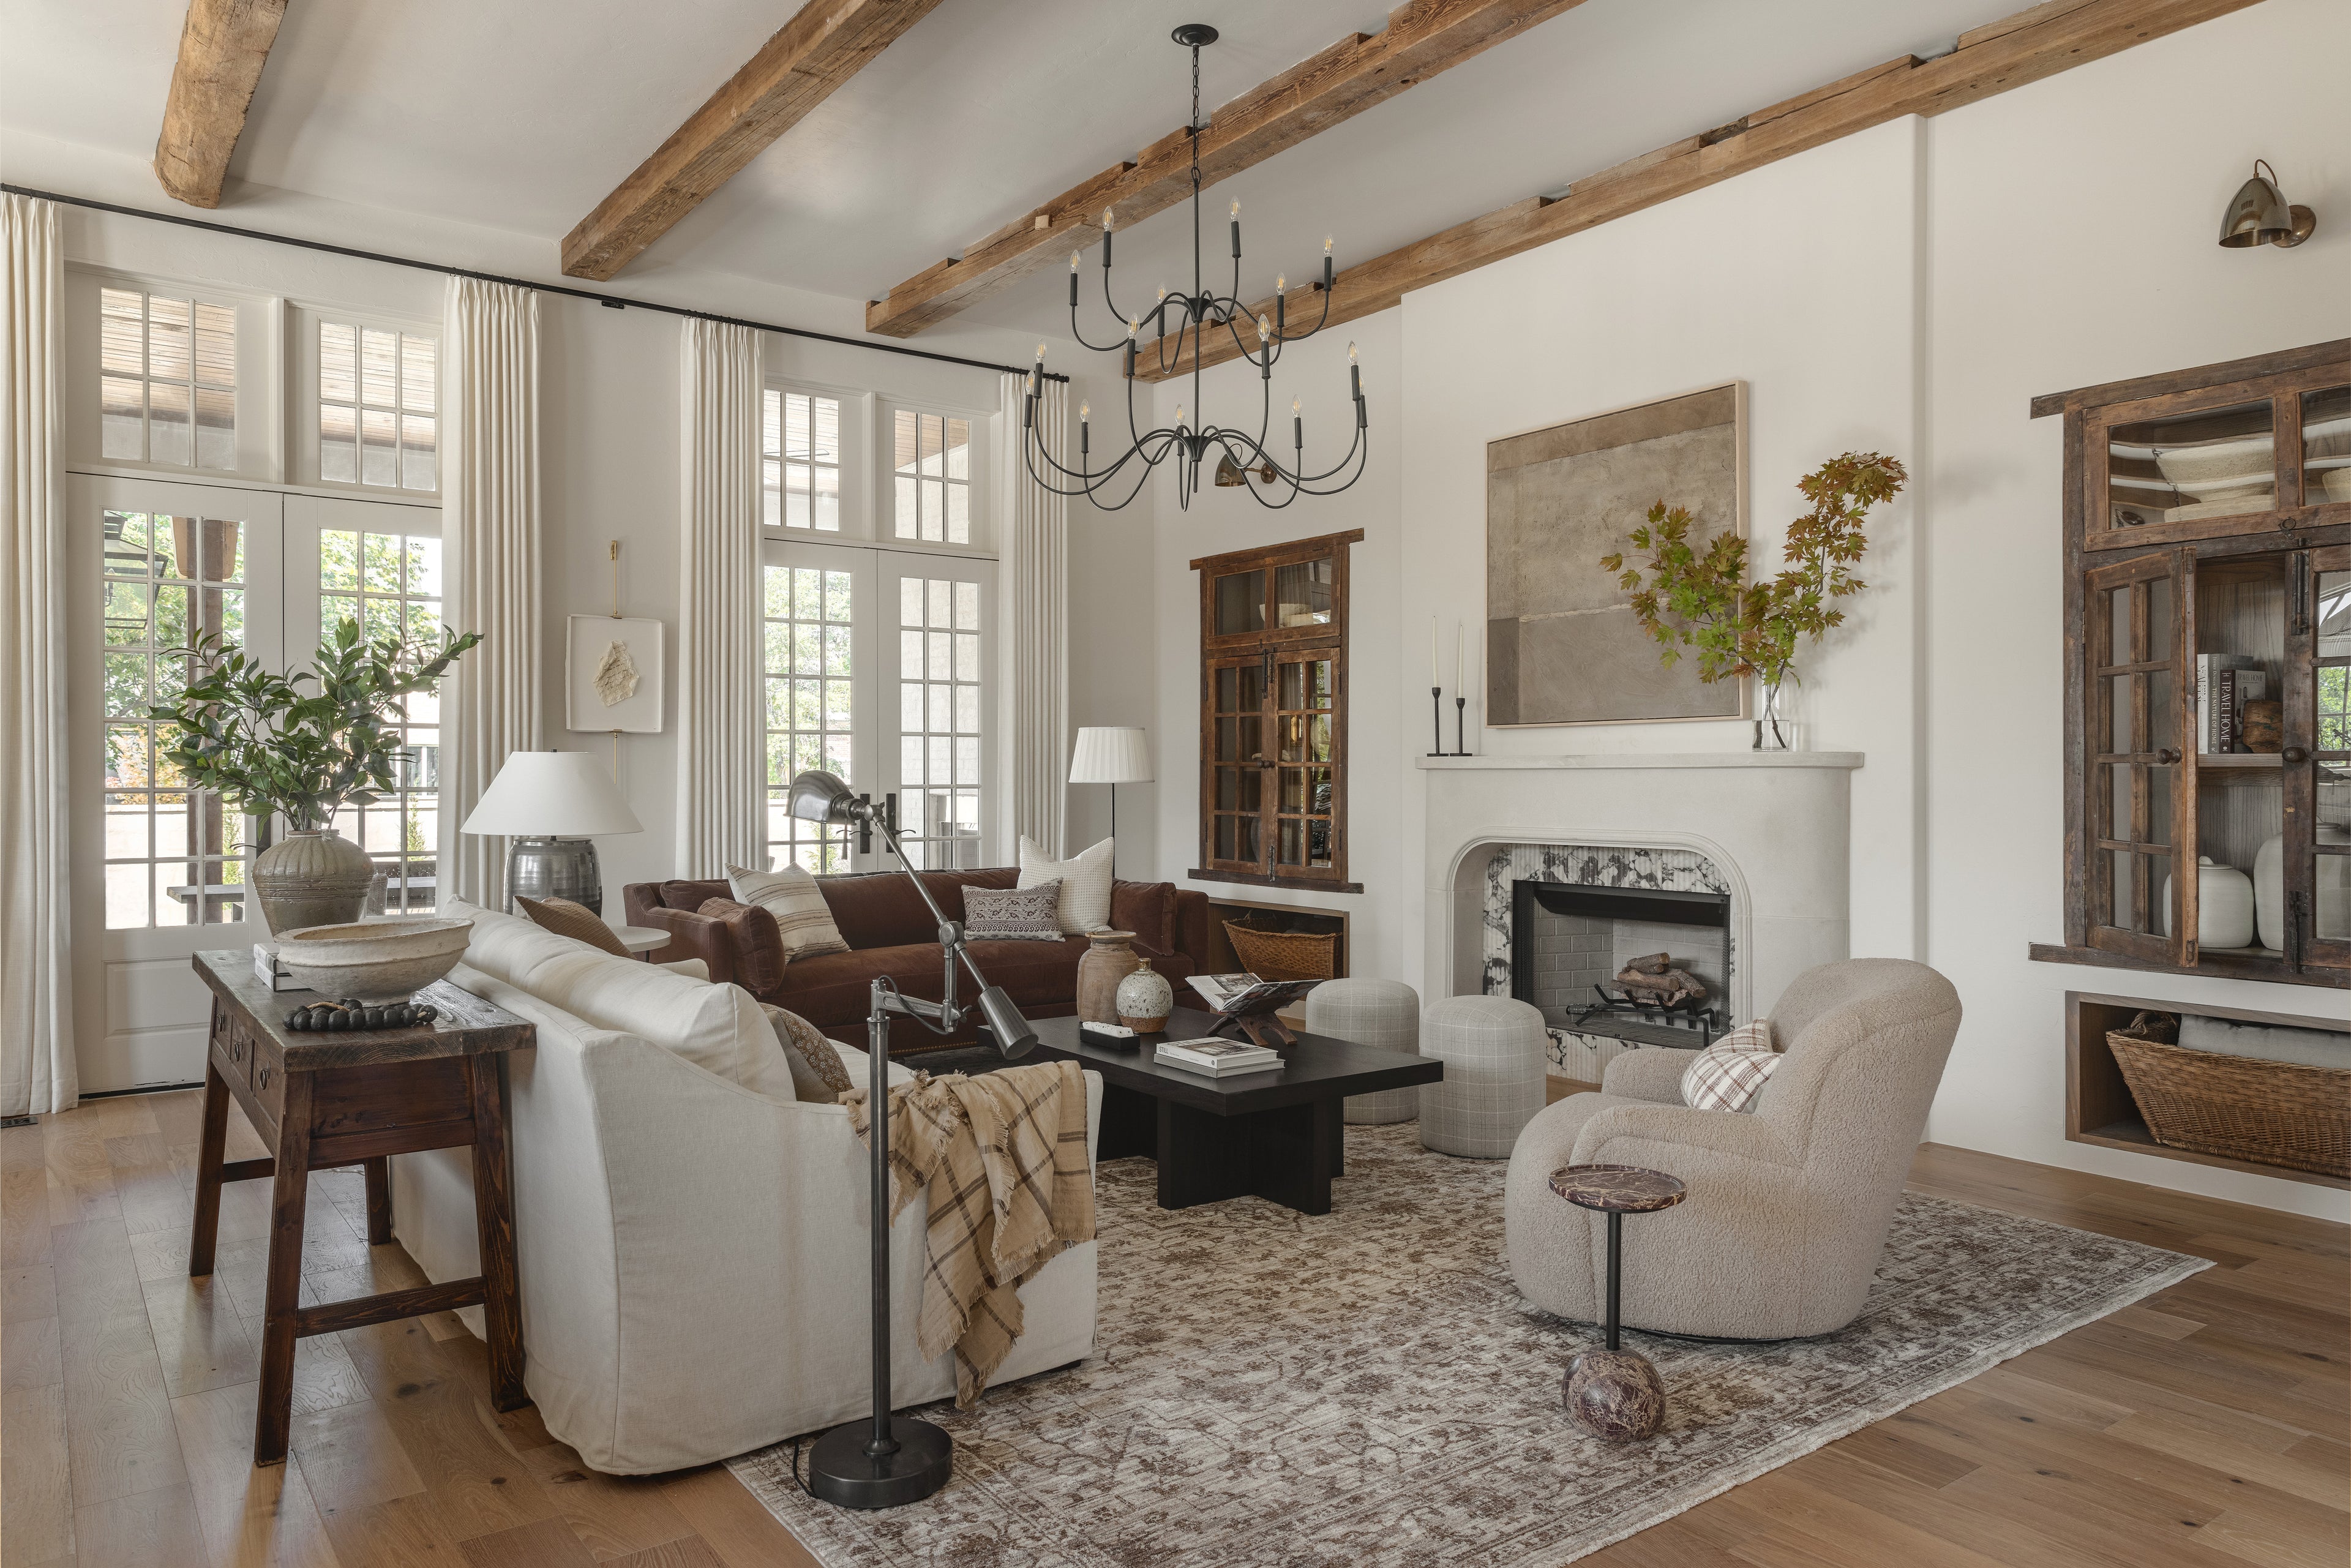 Rustic, modern living room from the Black Oak project